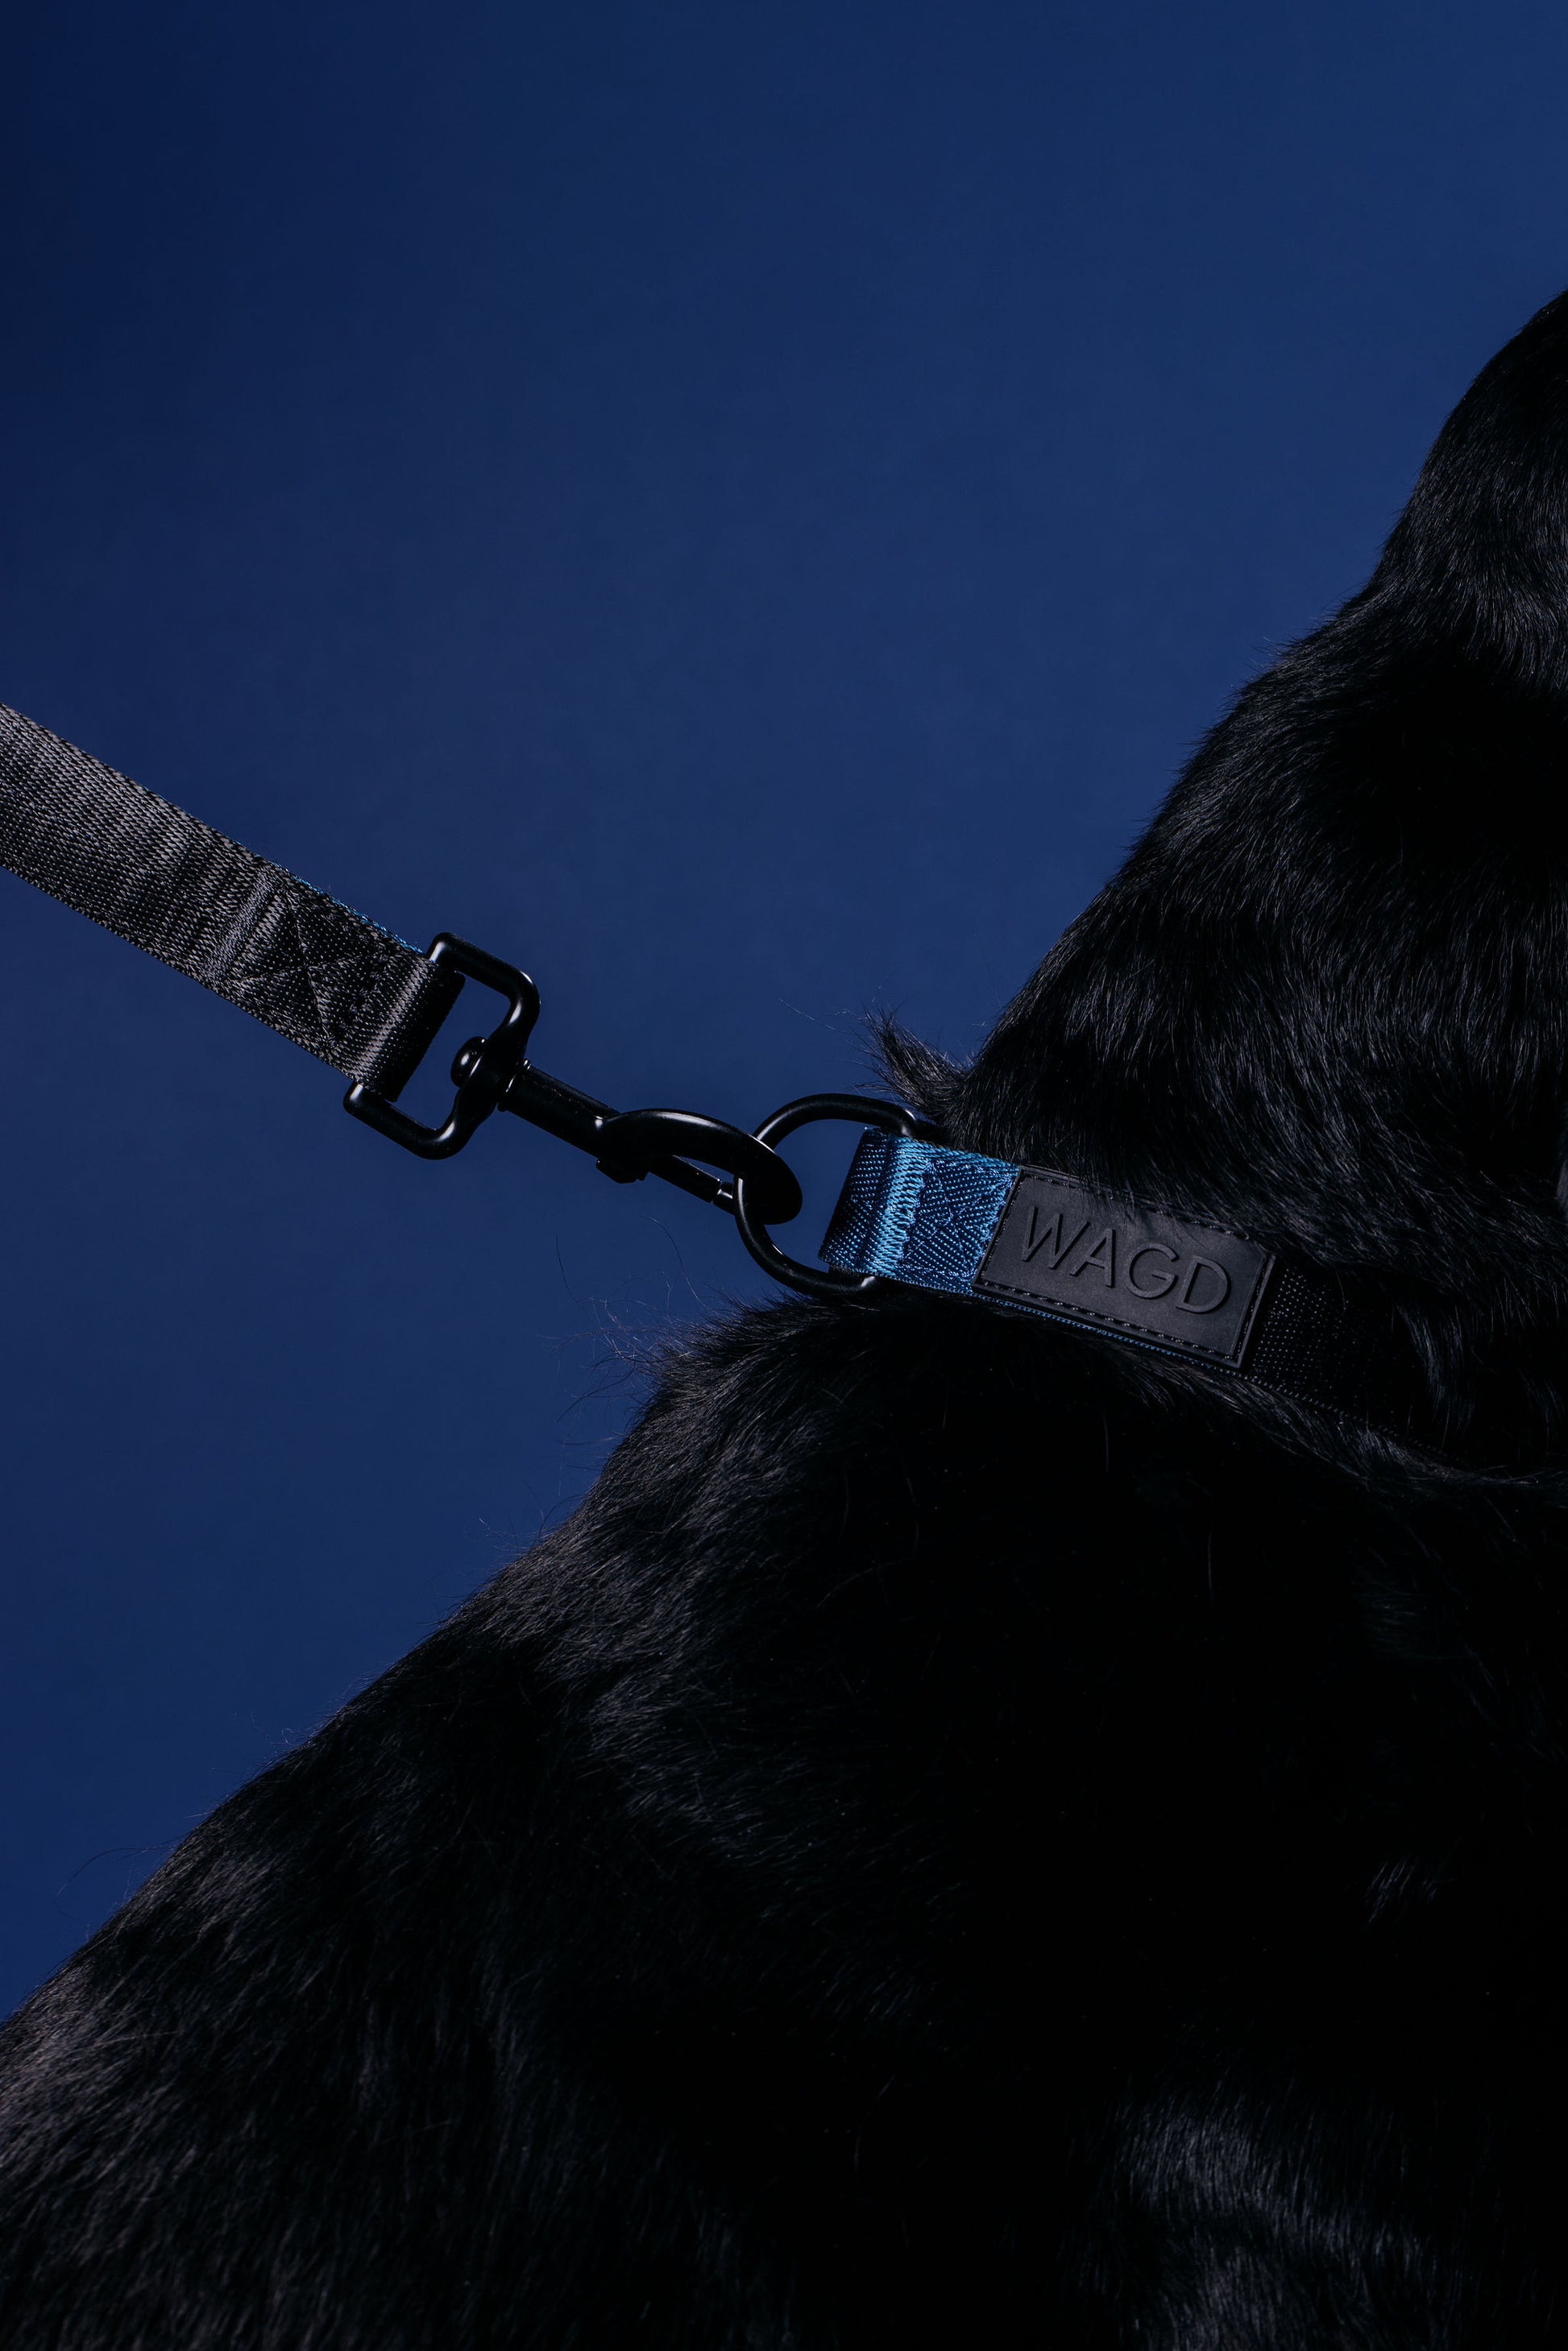 Picture of black Labrador dog neck wearing a black and peacock collar with lead attached.